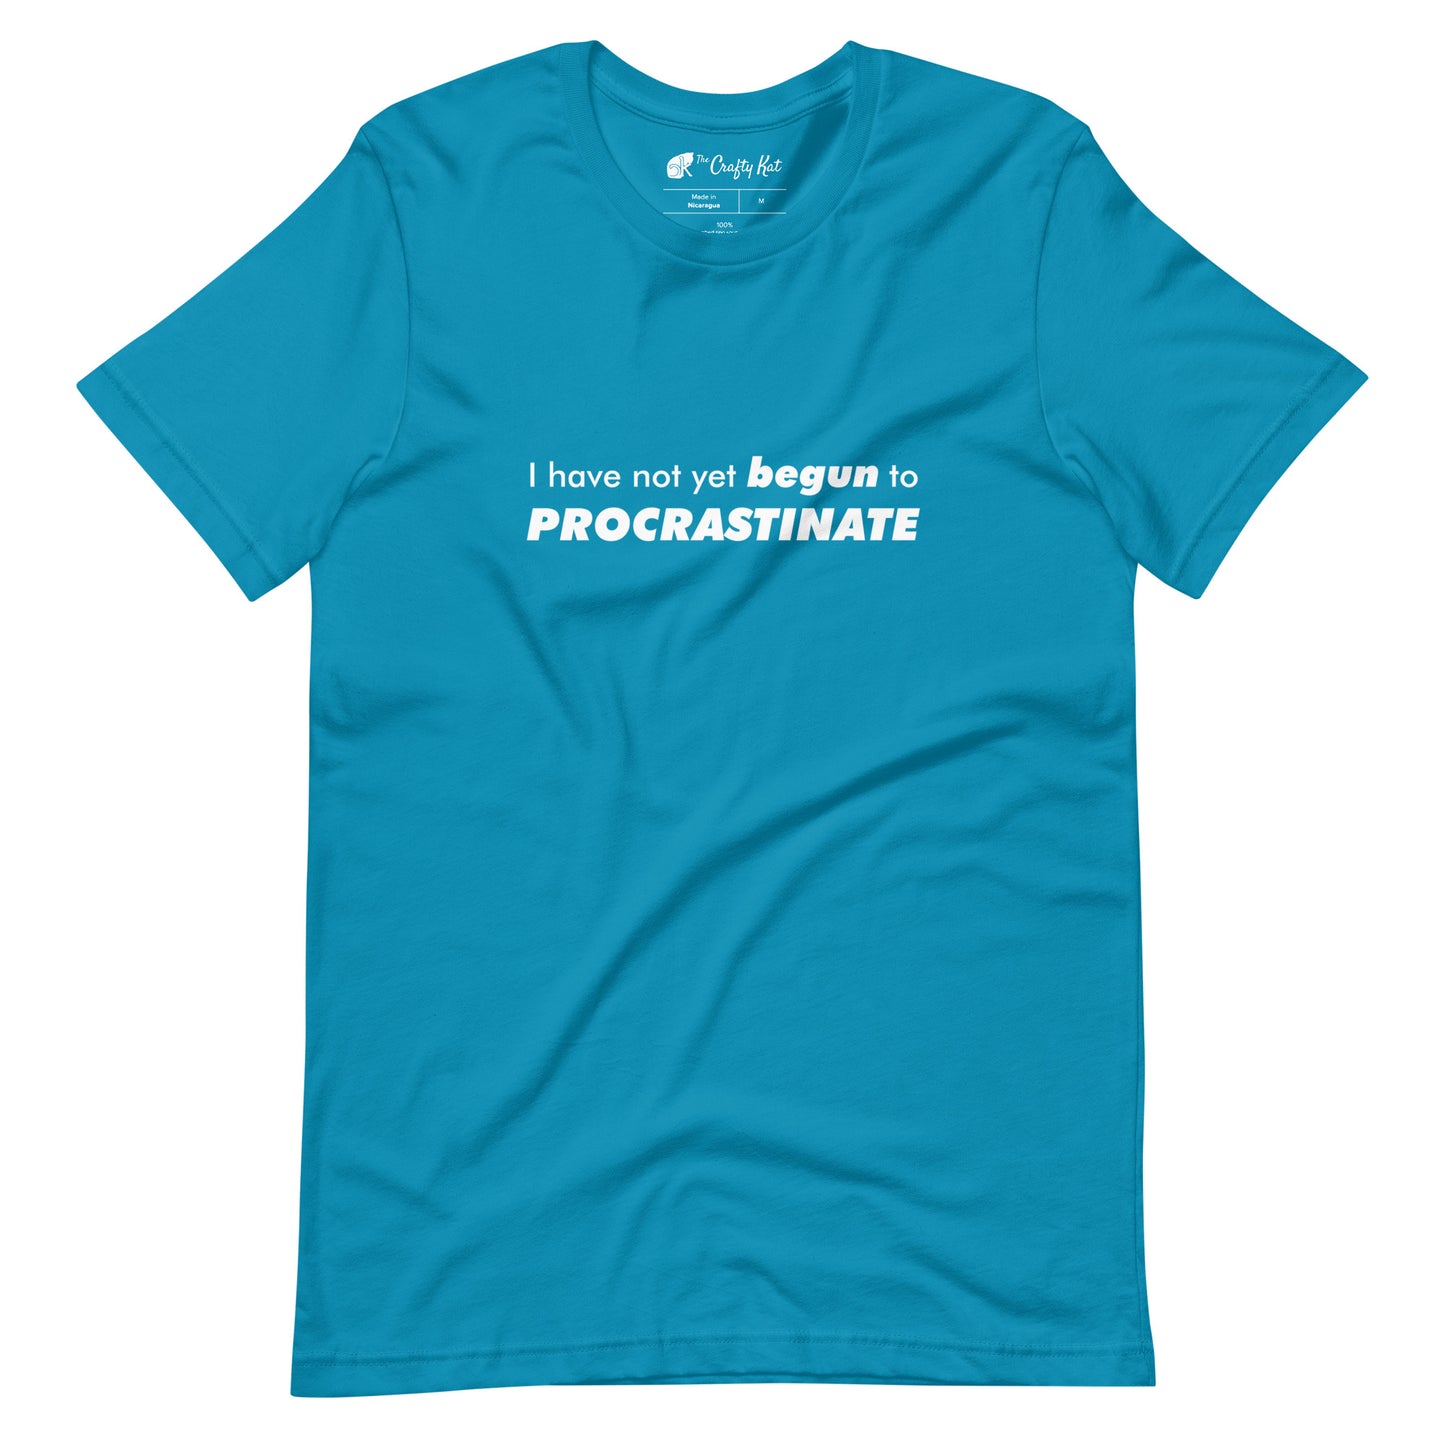 Aqua (sky blue) t-shirt with text graphic: "I have not yet BEGUN to PROCRASTINATE"